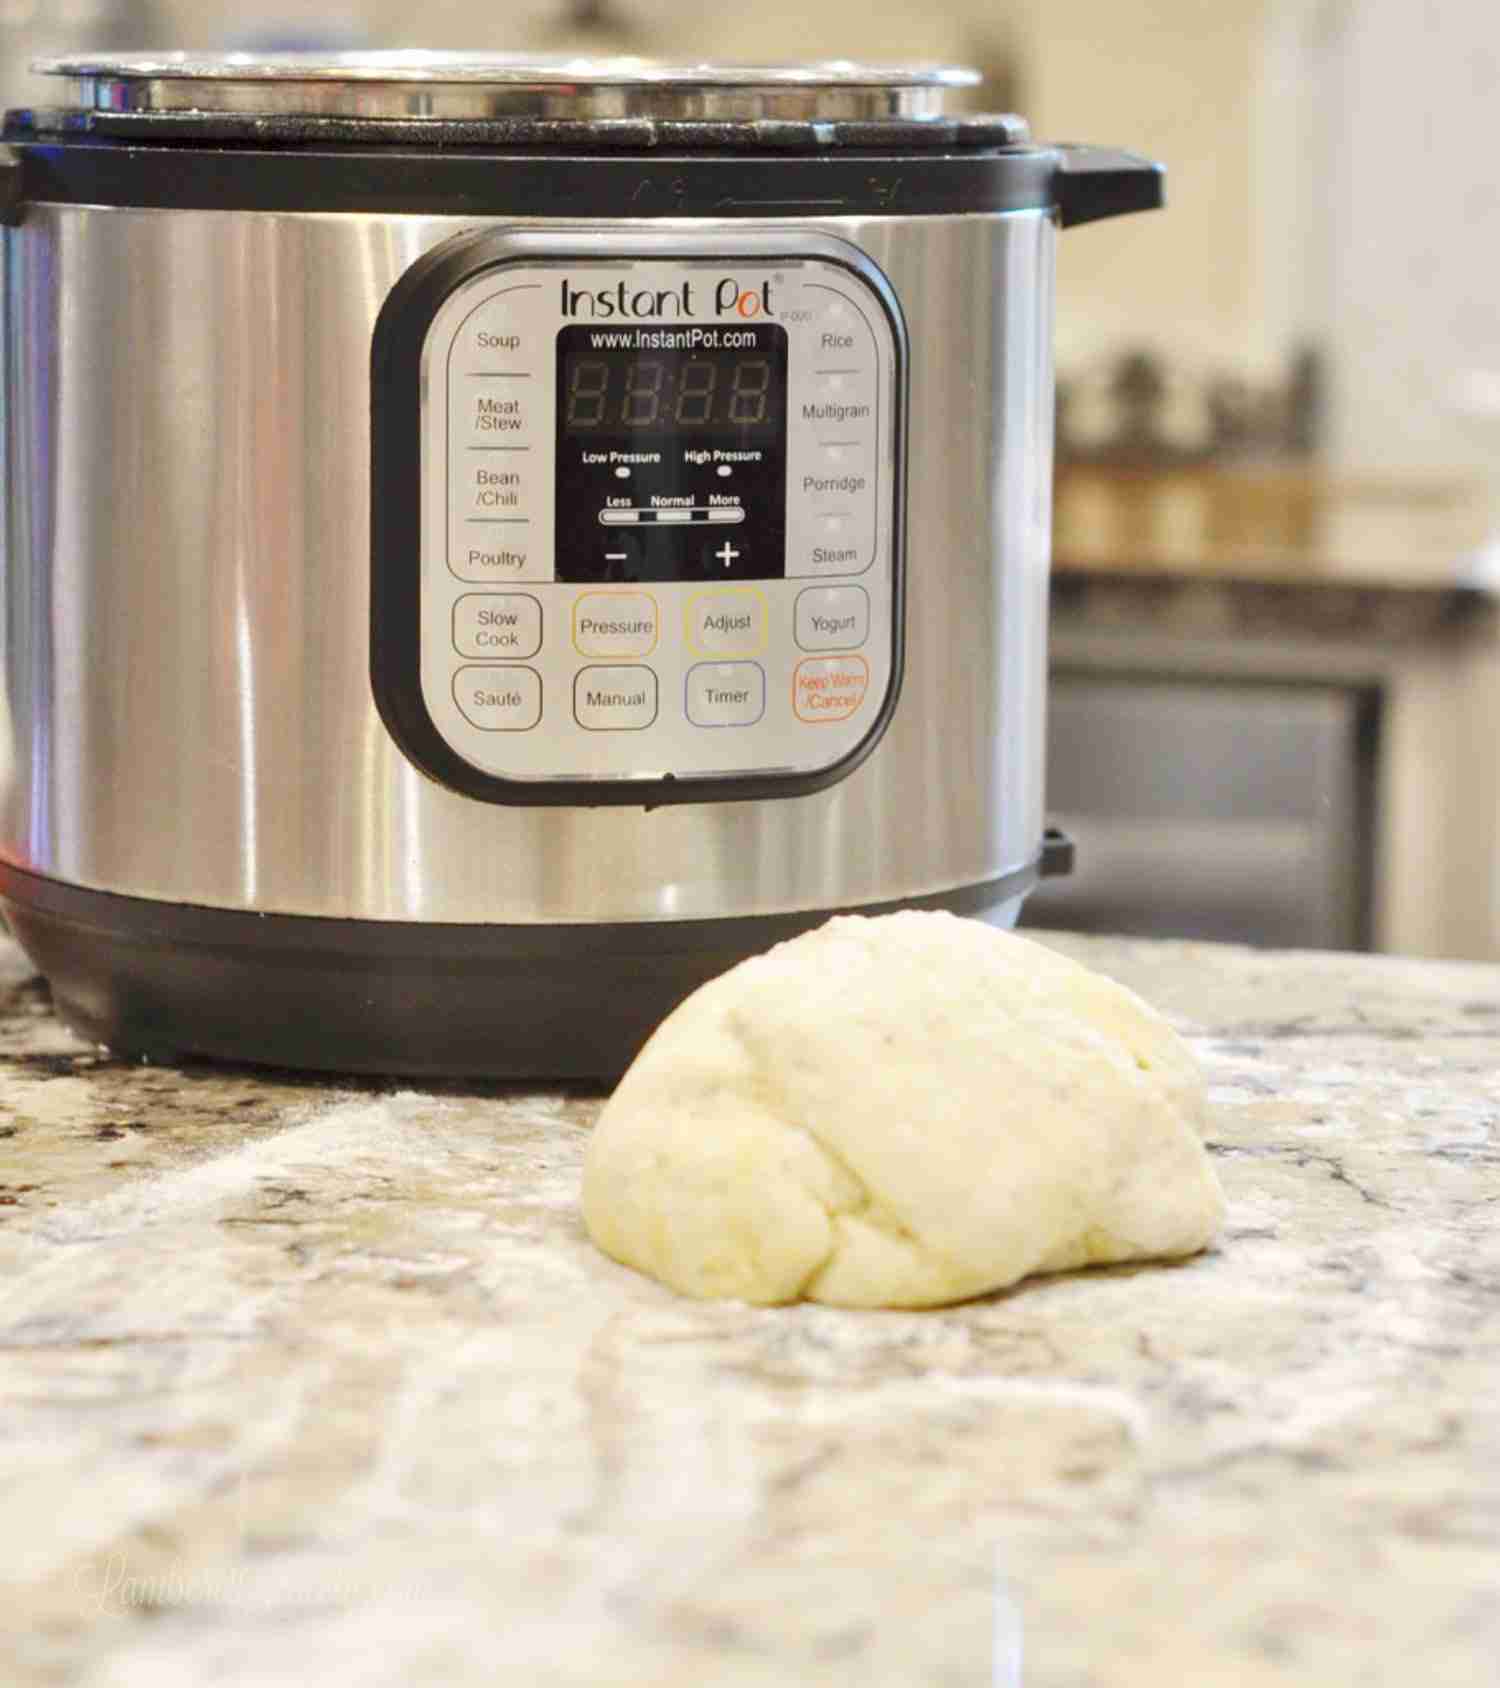 This easy recipe for homemade pizza dough is made in an Instant Pot pressure cooker! It has a quick prep and rise time and is perfect for pizza night with a family.